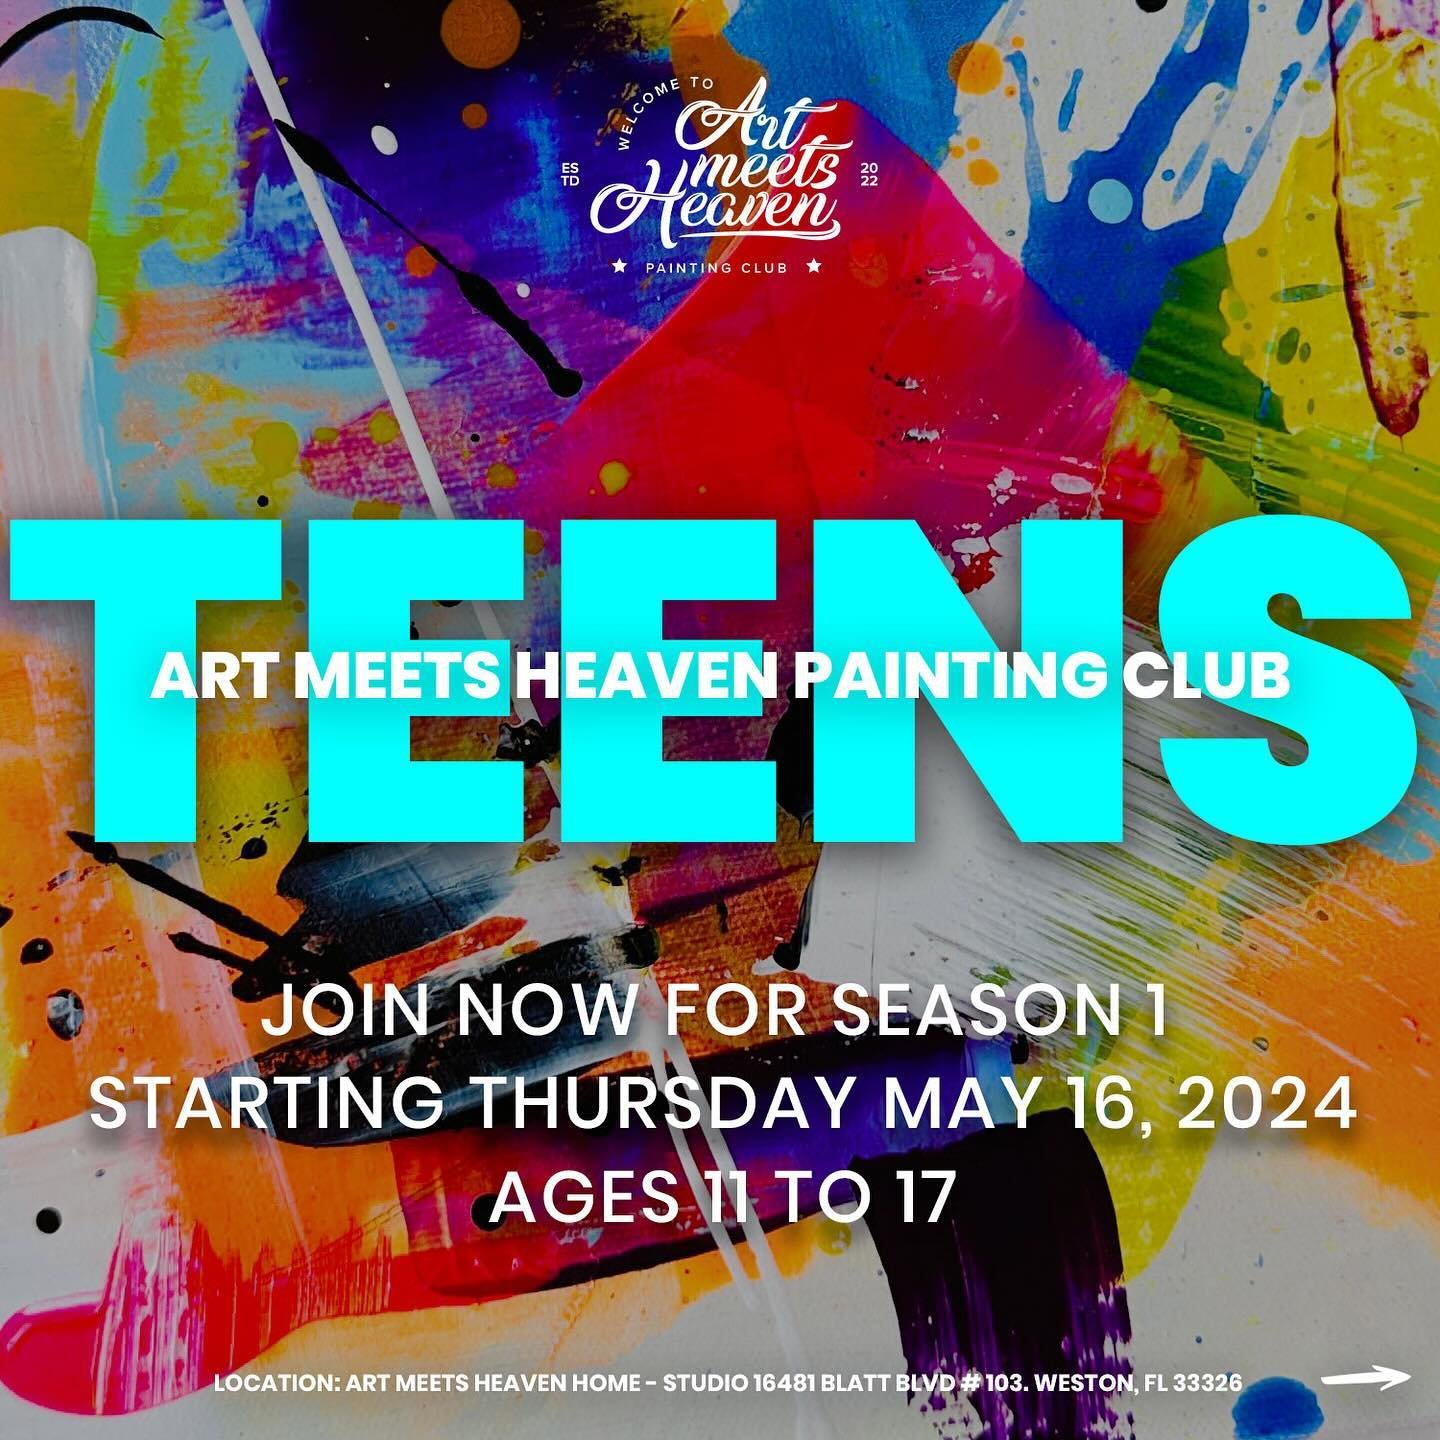 🚨Registration is now OPEN. Art Meets Heaven TEENS PAINTING CLUB 🚨
.
🚨 Specially designed to overcome insecurities and unleash the inner artist in your teen. The classes are set to paint freely in a space where authenticity and spontaneity lead the